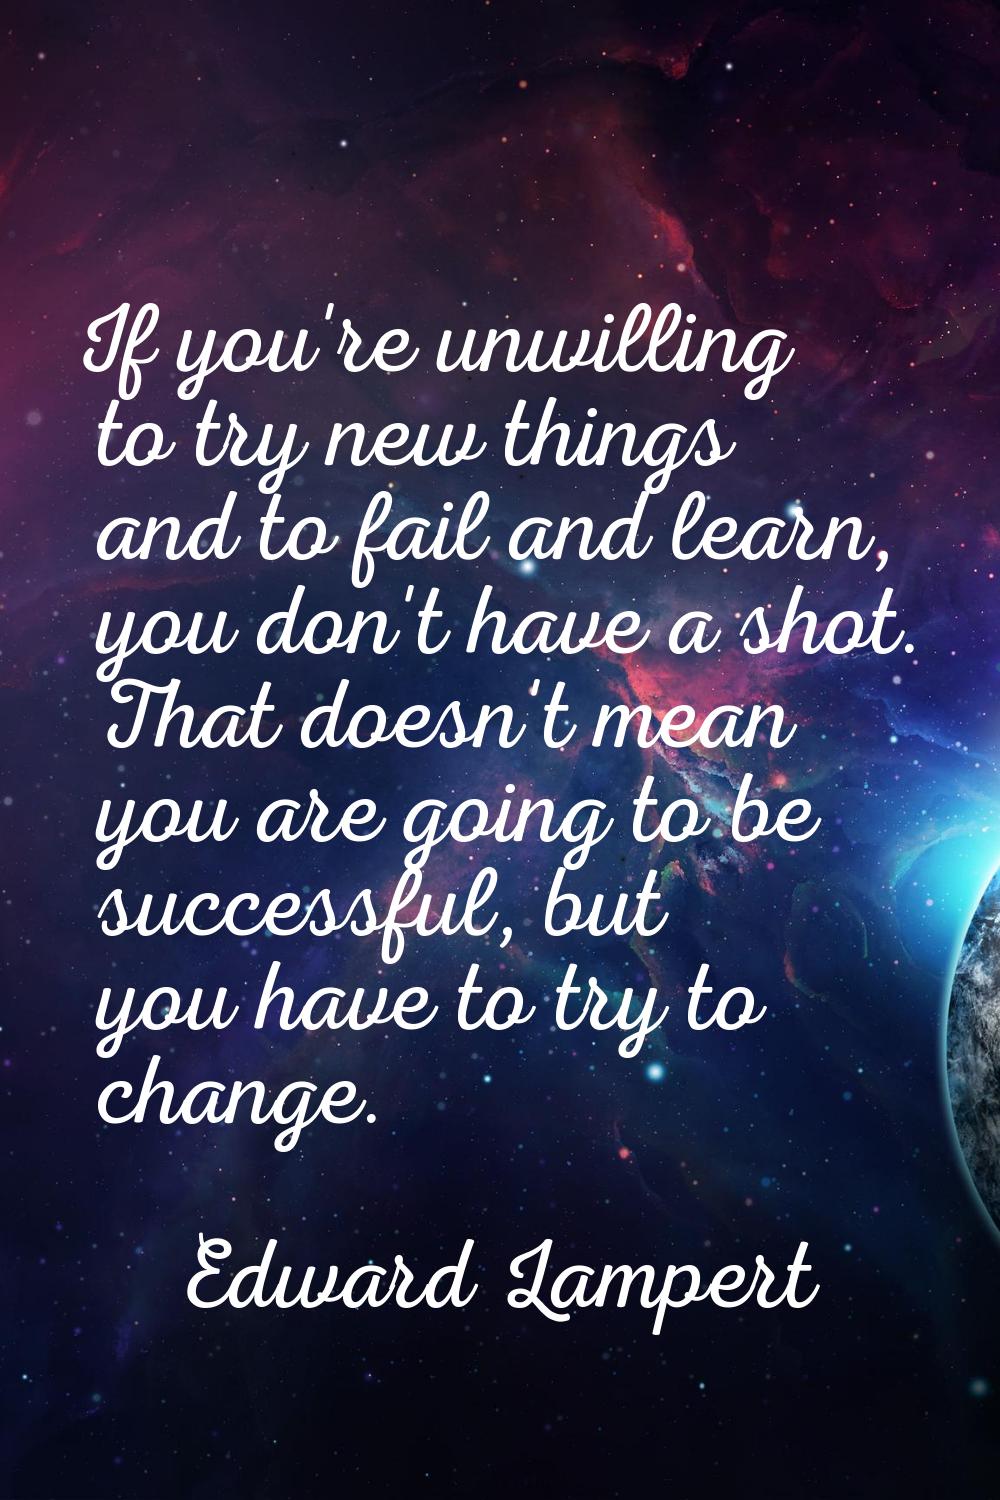 If you're unwilling to try new things and to fail and learn, you don't have a shot. That doesn't me